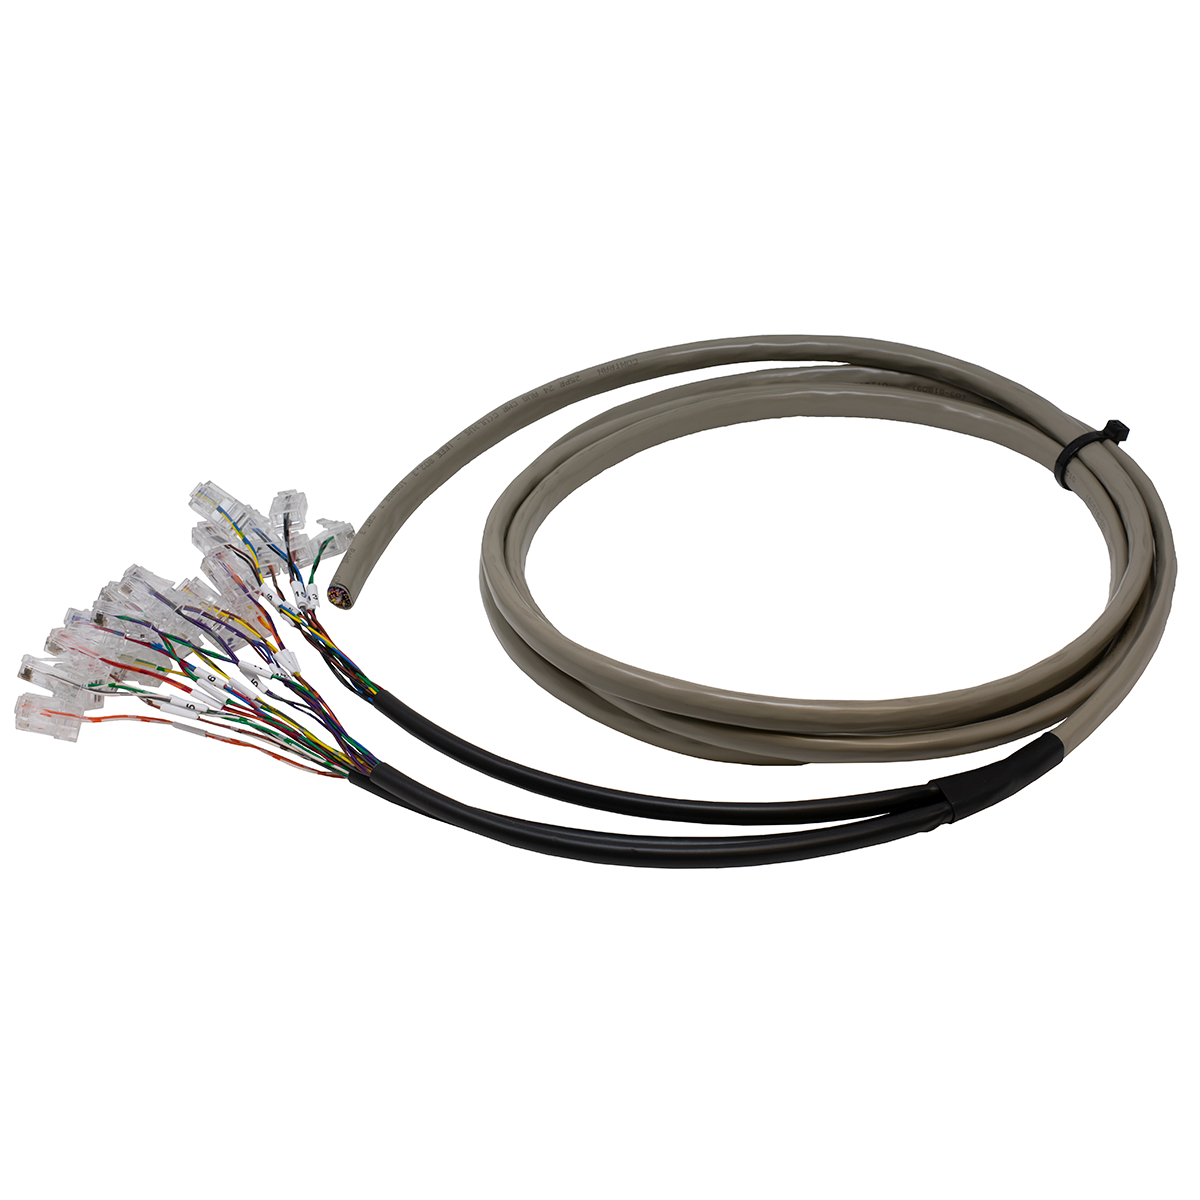 QWIK 10' Avaya IP Office / Samsung Officeserv Cable